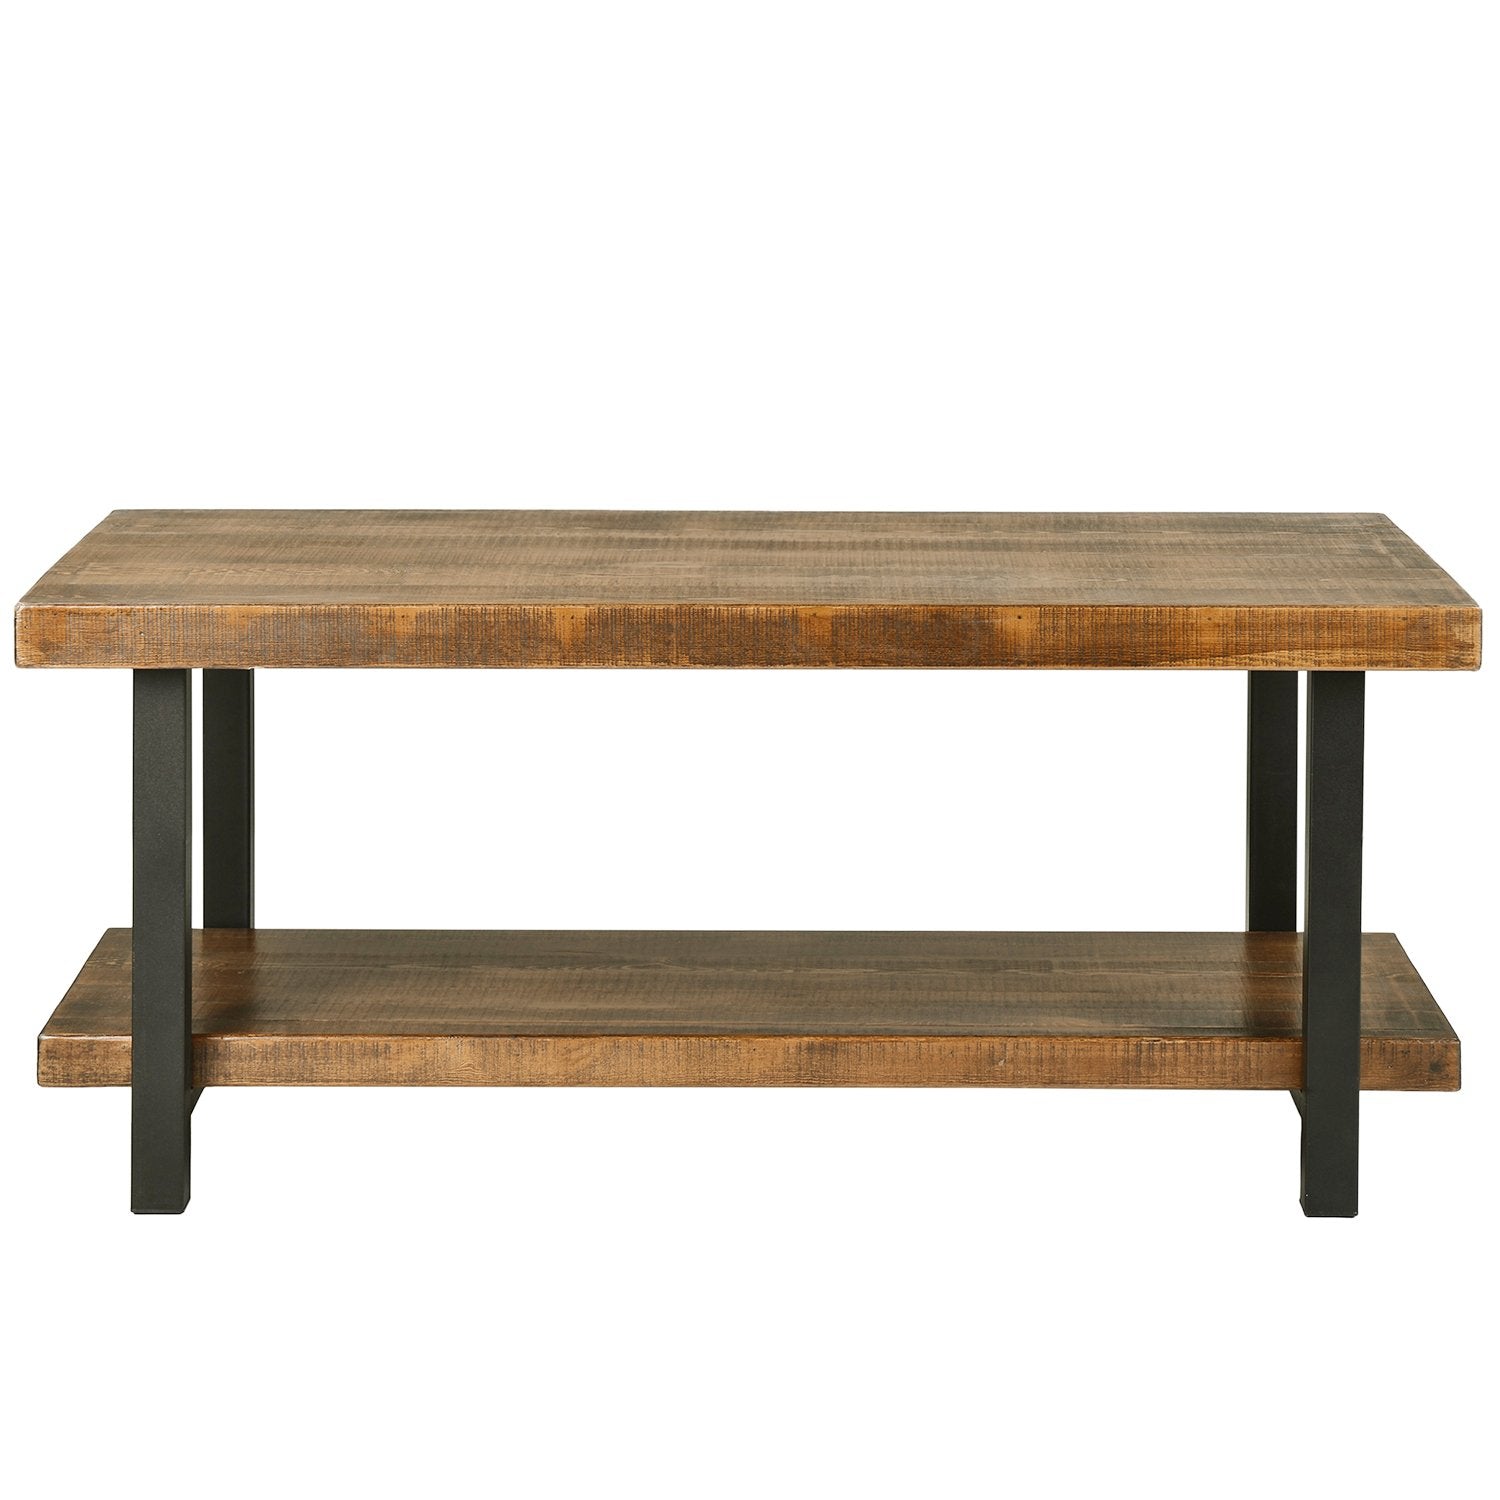 Rustic Natural Coffee Table with Storage Shelf(Rectangle)